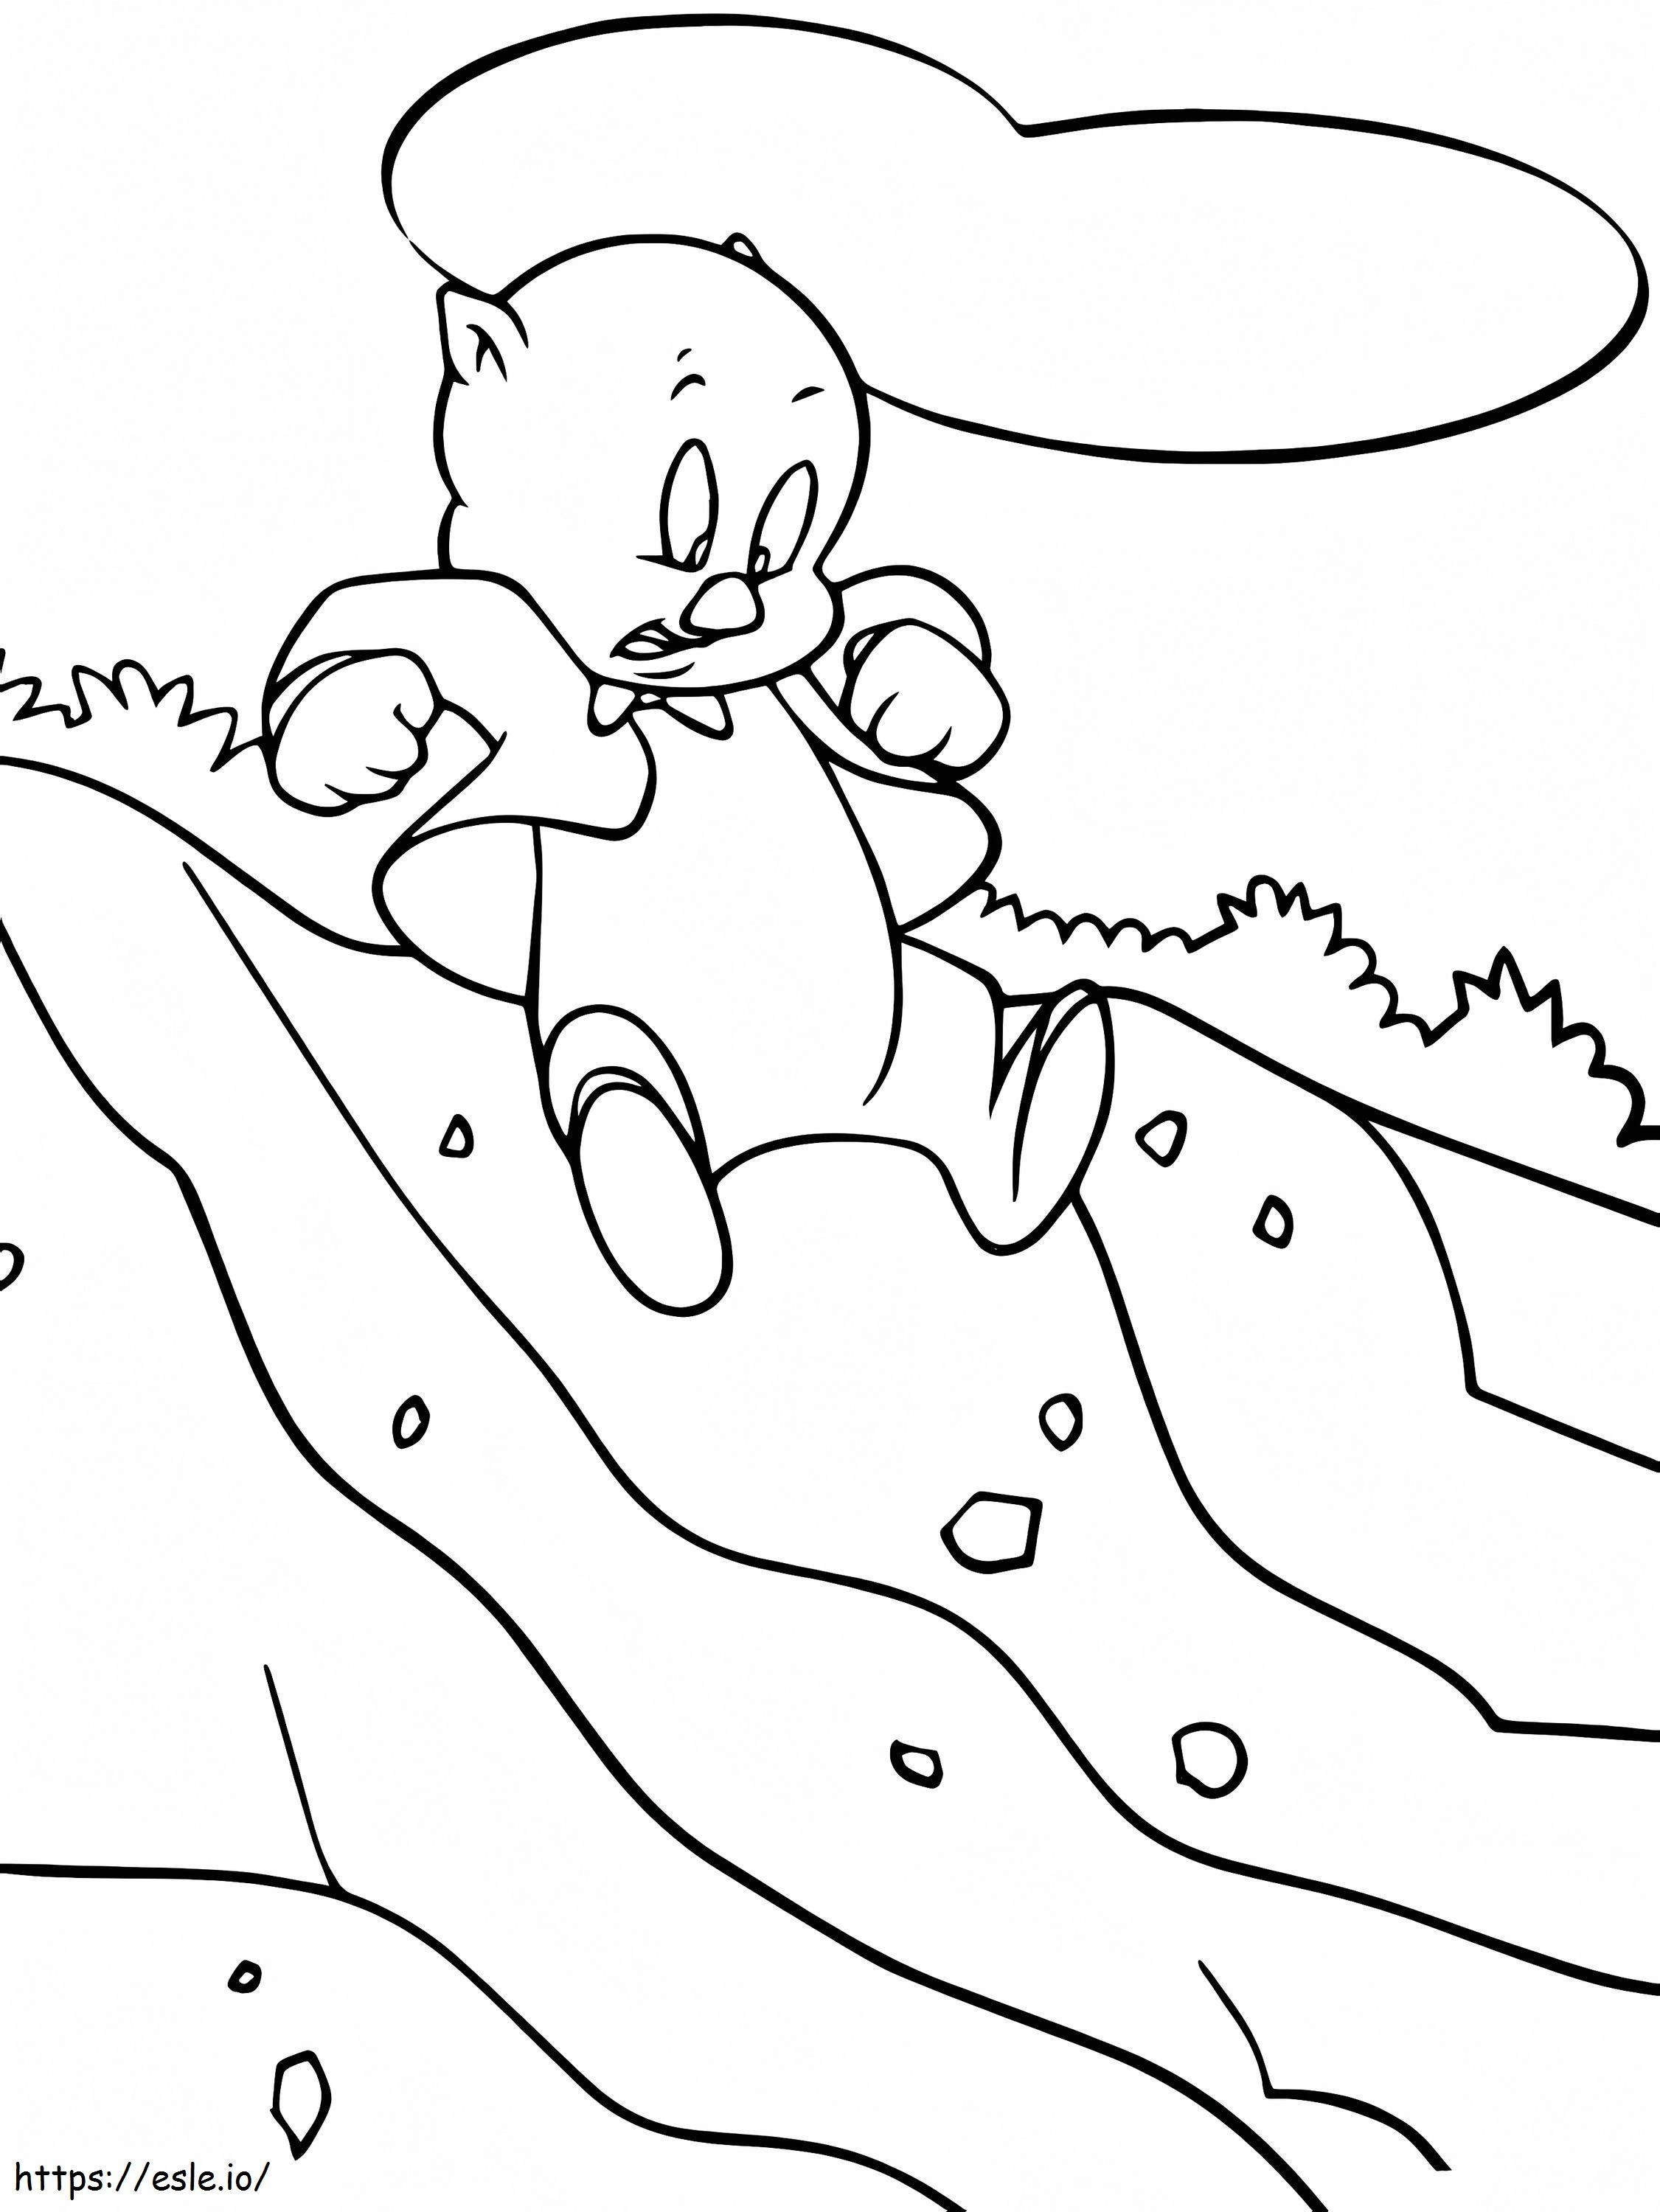 Porky Pig Looney Tunes coloring page